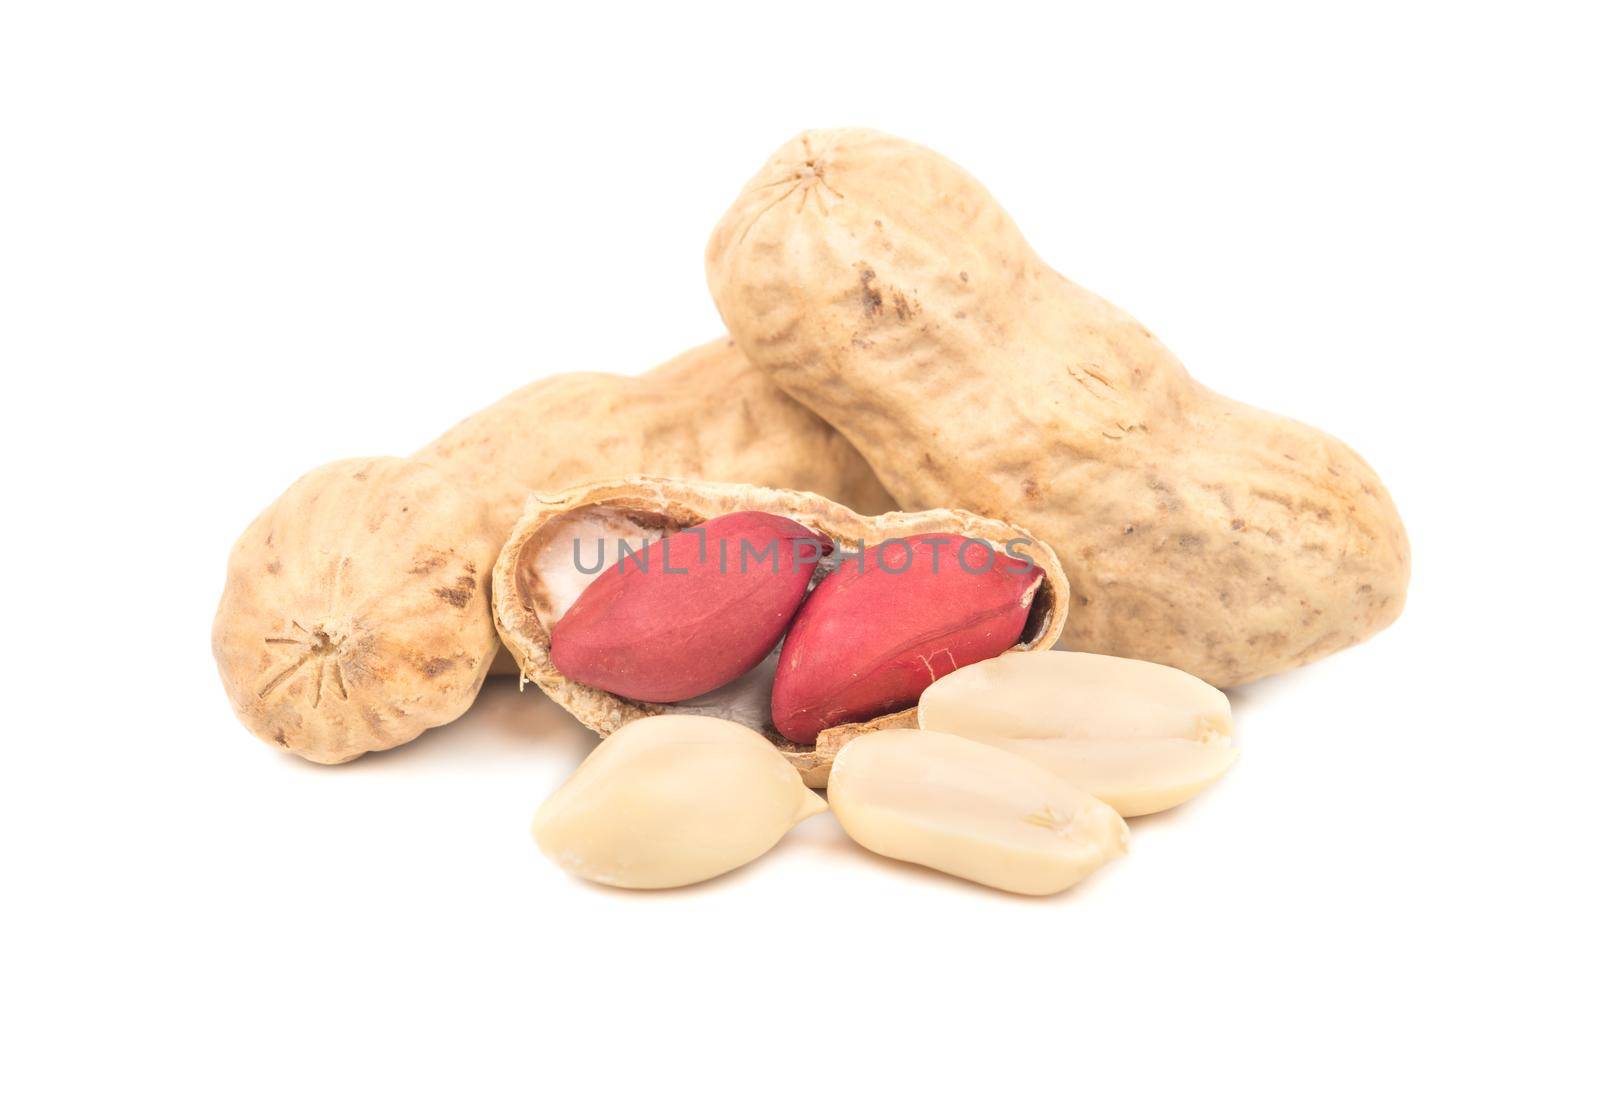 Peanuts in shell and multiple cores on a white background